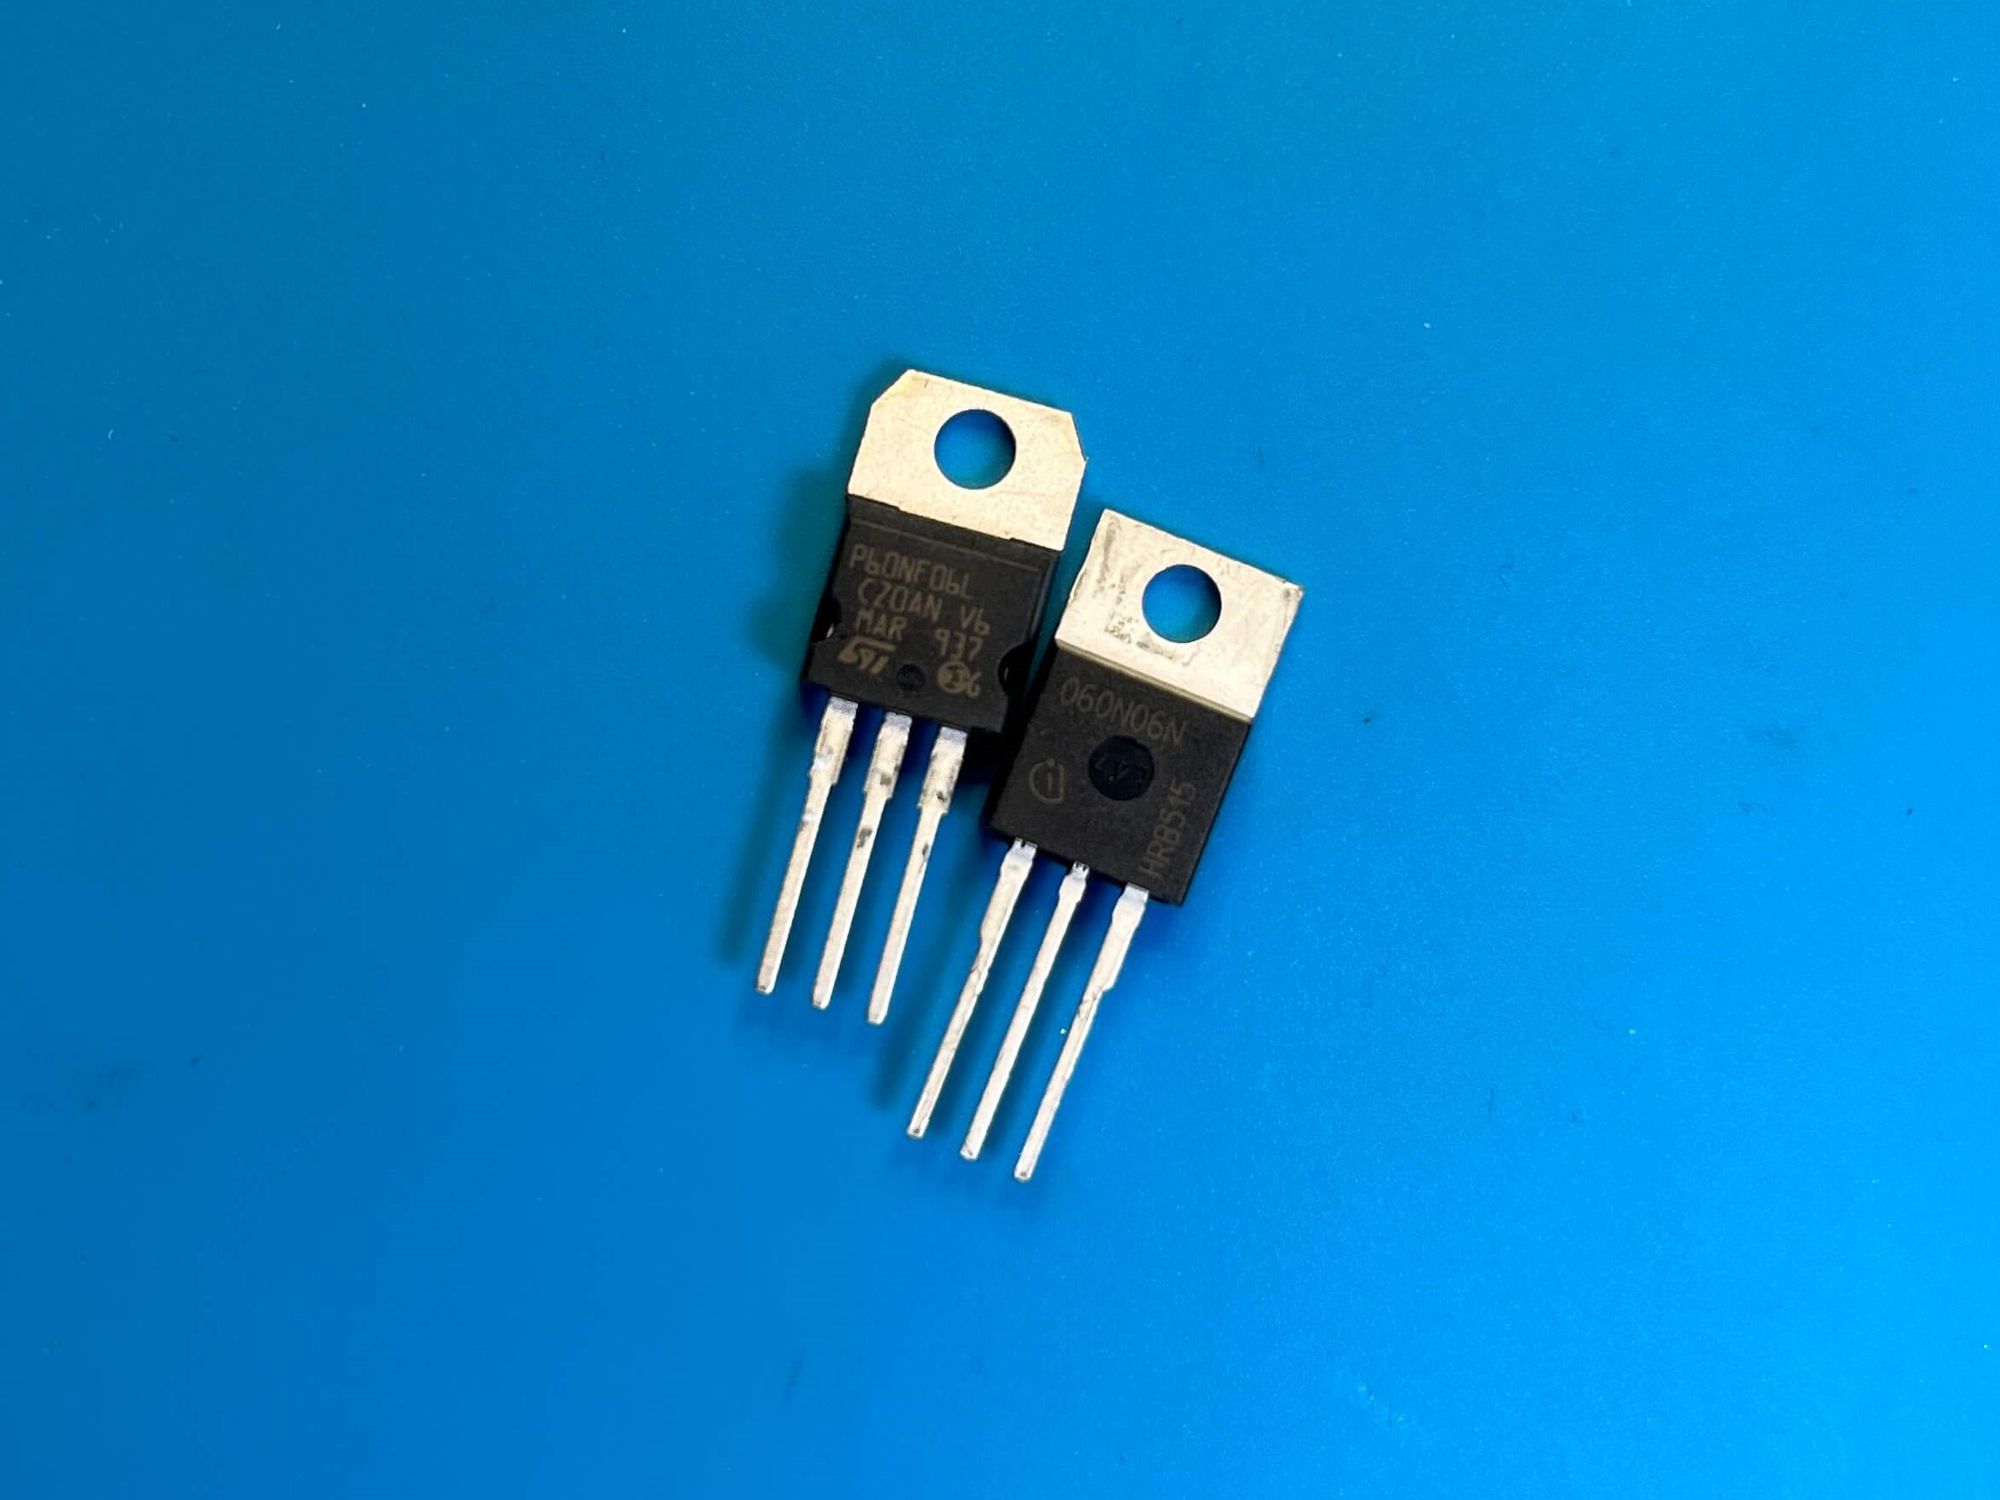 Photo of two logic-level MOSFETs on a blue electronics mat.